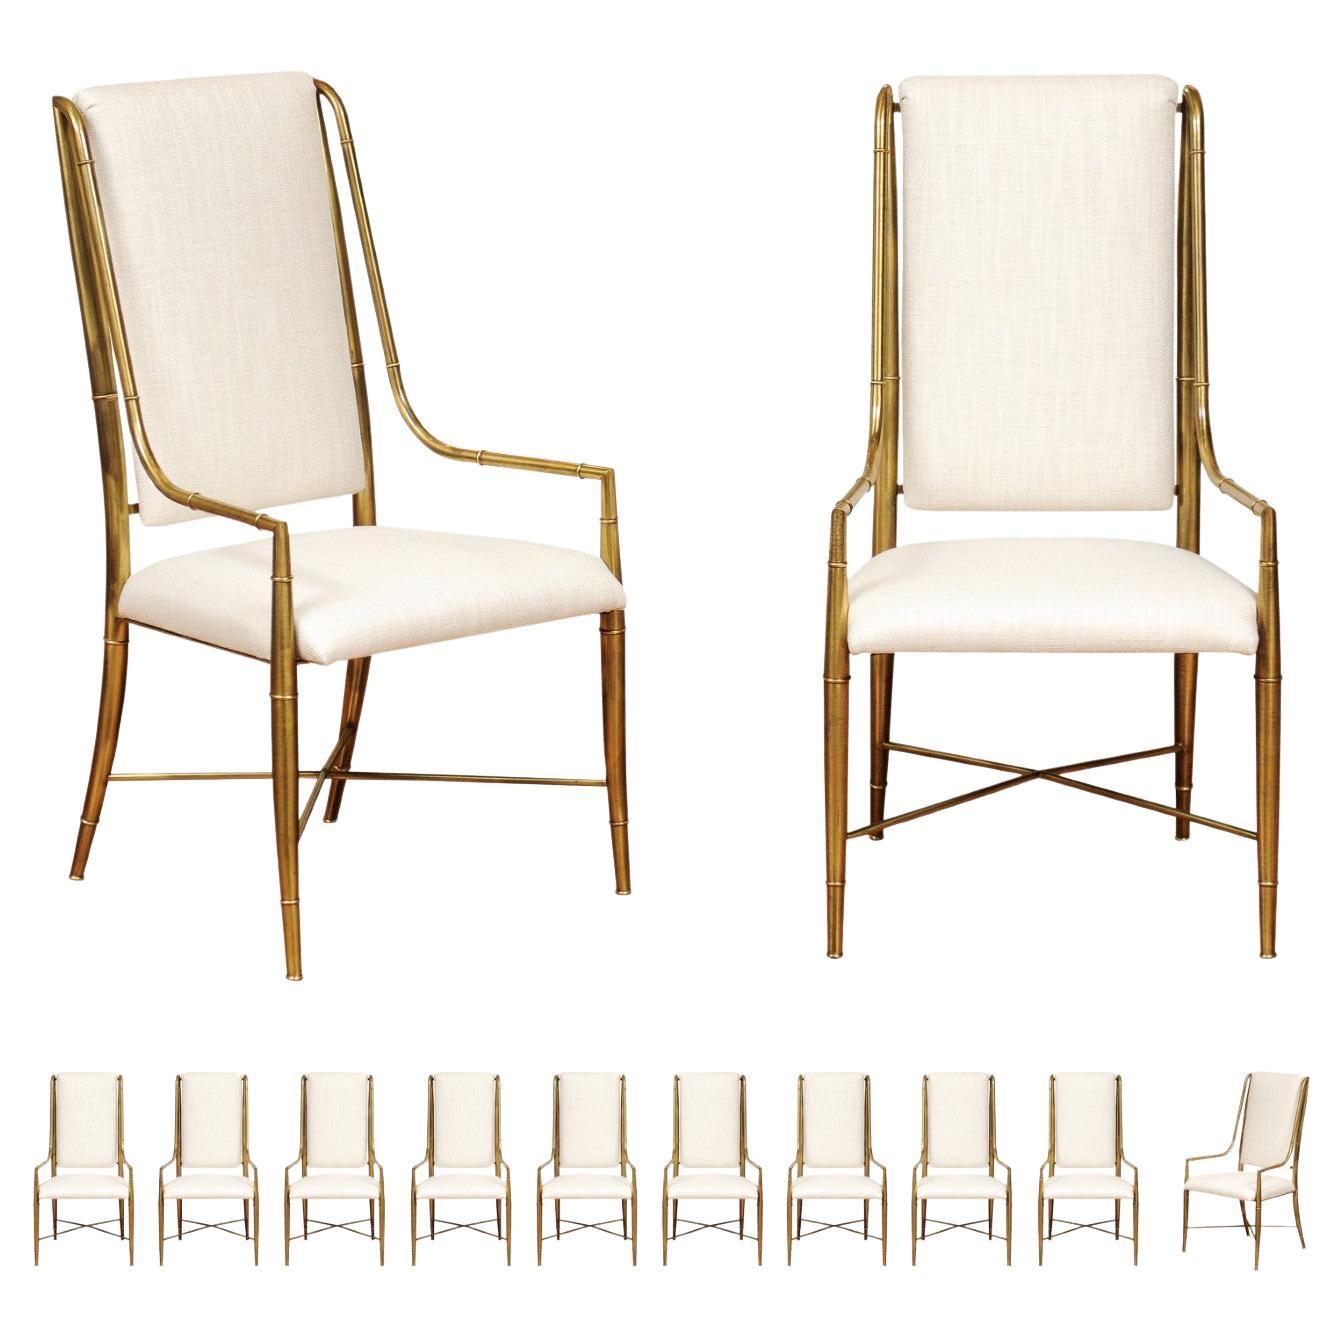 Magnificent Set of 12 Dining Brass Chairs by Weiman/Warren Lloyd for Mastercraft